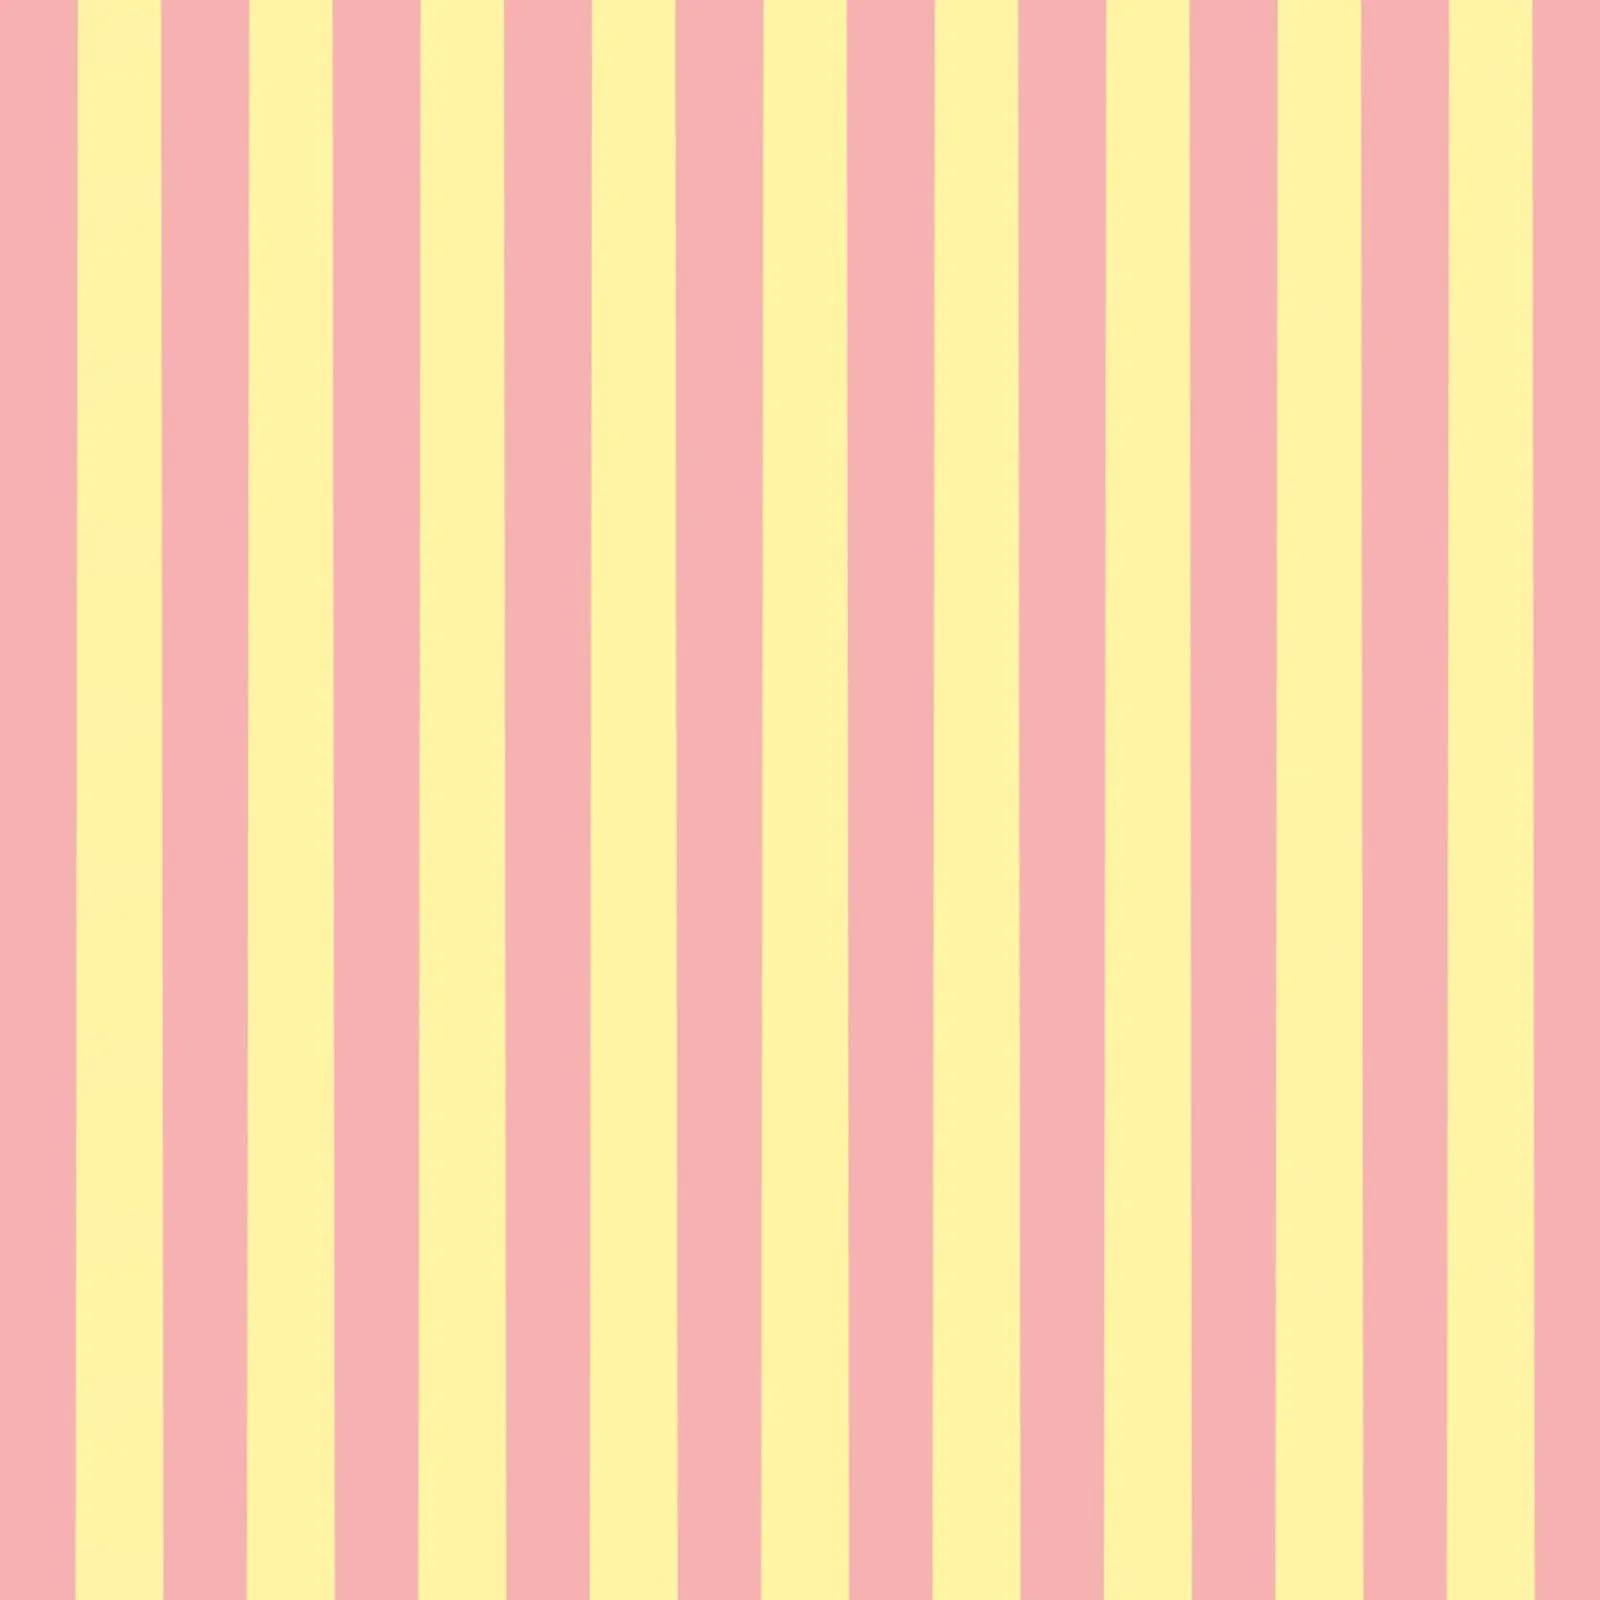 Stampin D'Amour: FREE Digital Scrapbook Paper - Pink and Yellow ...